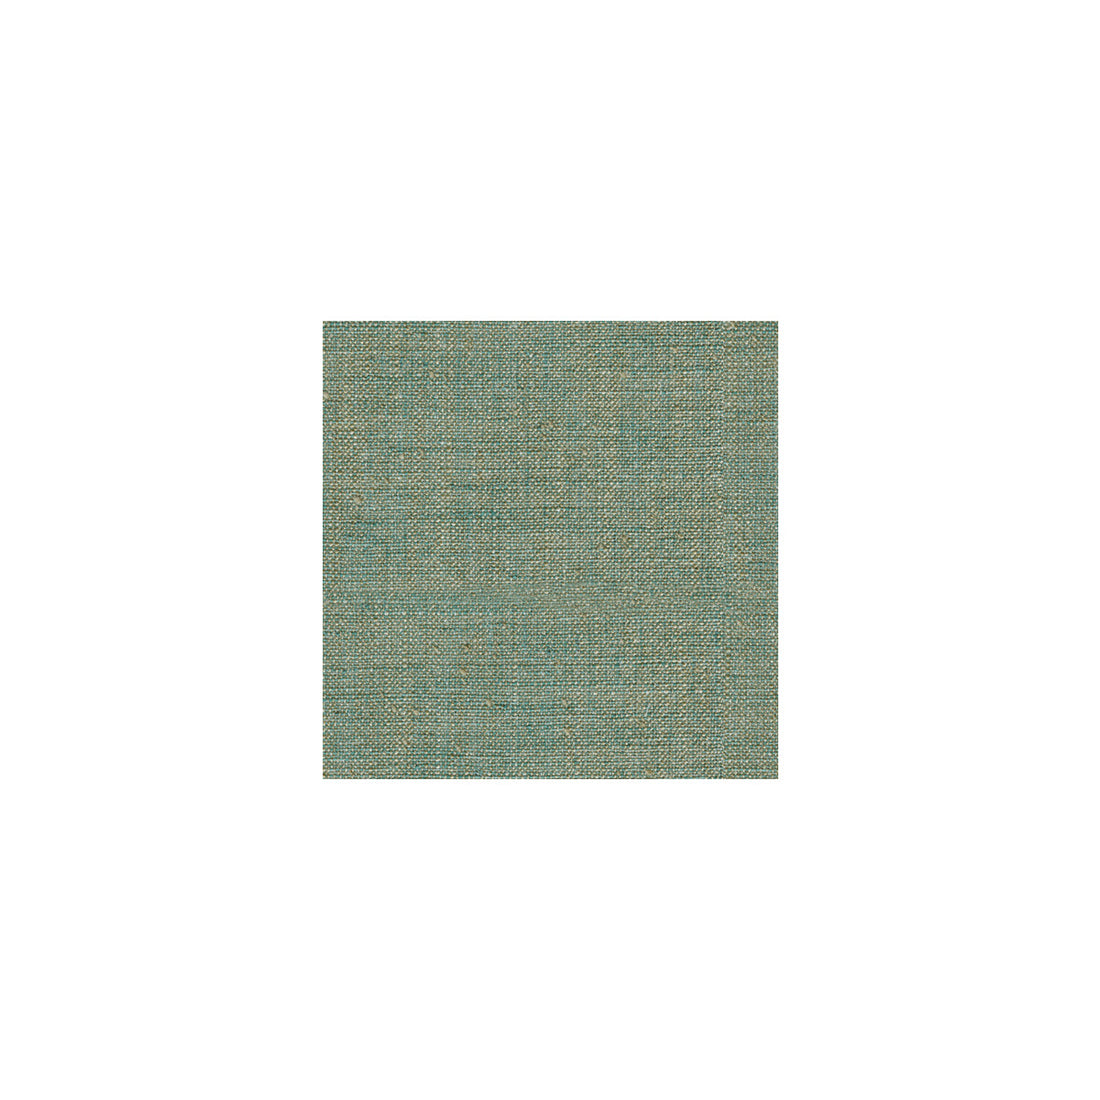 Blitz fabric in turq color - pattern 28752.135.0 - by Kravet Smart